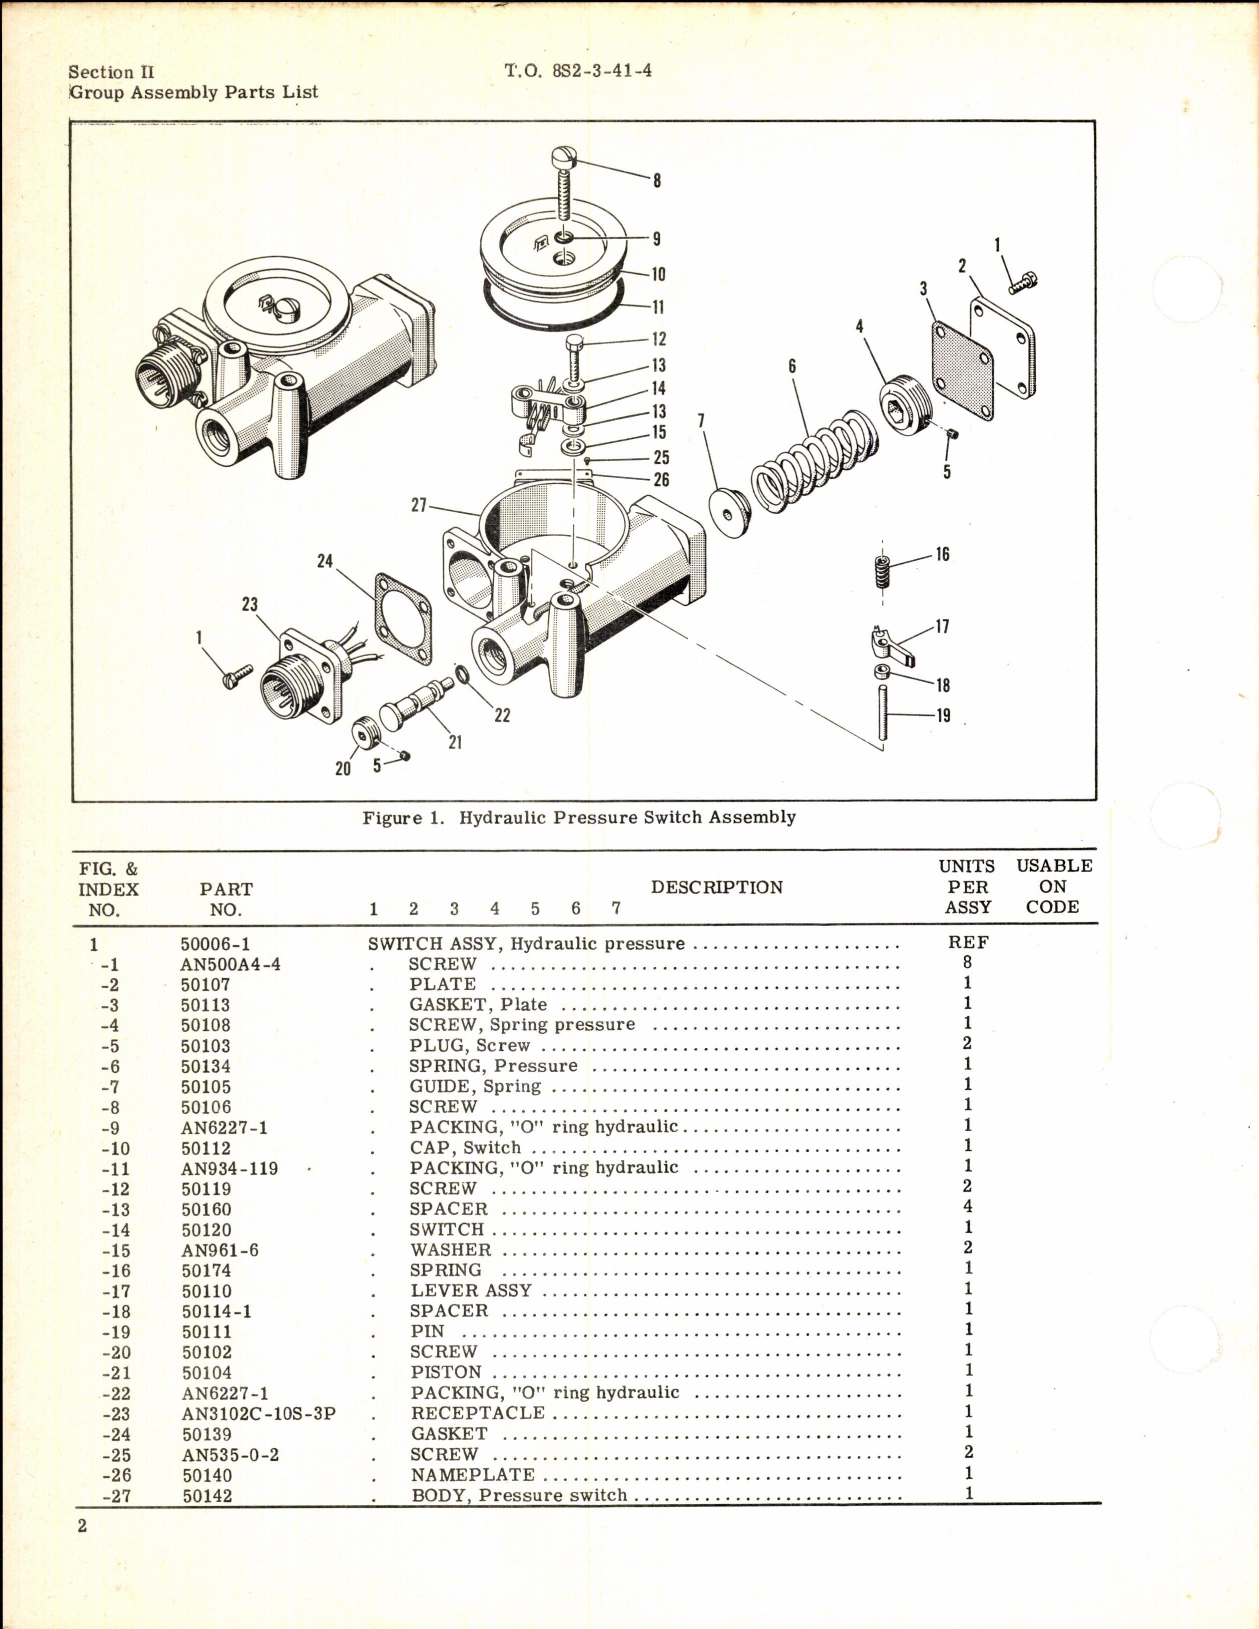 Sample page 2 from AirCorps Library document: Illustrated Parts Breakdown for Hydraulic Pressure Switch